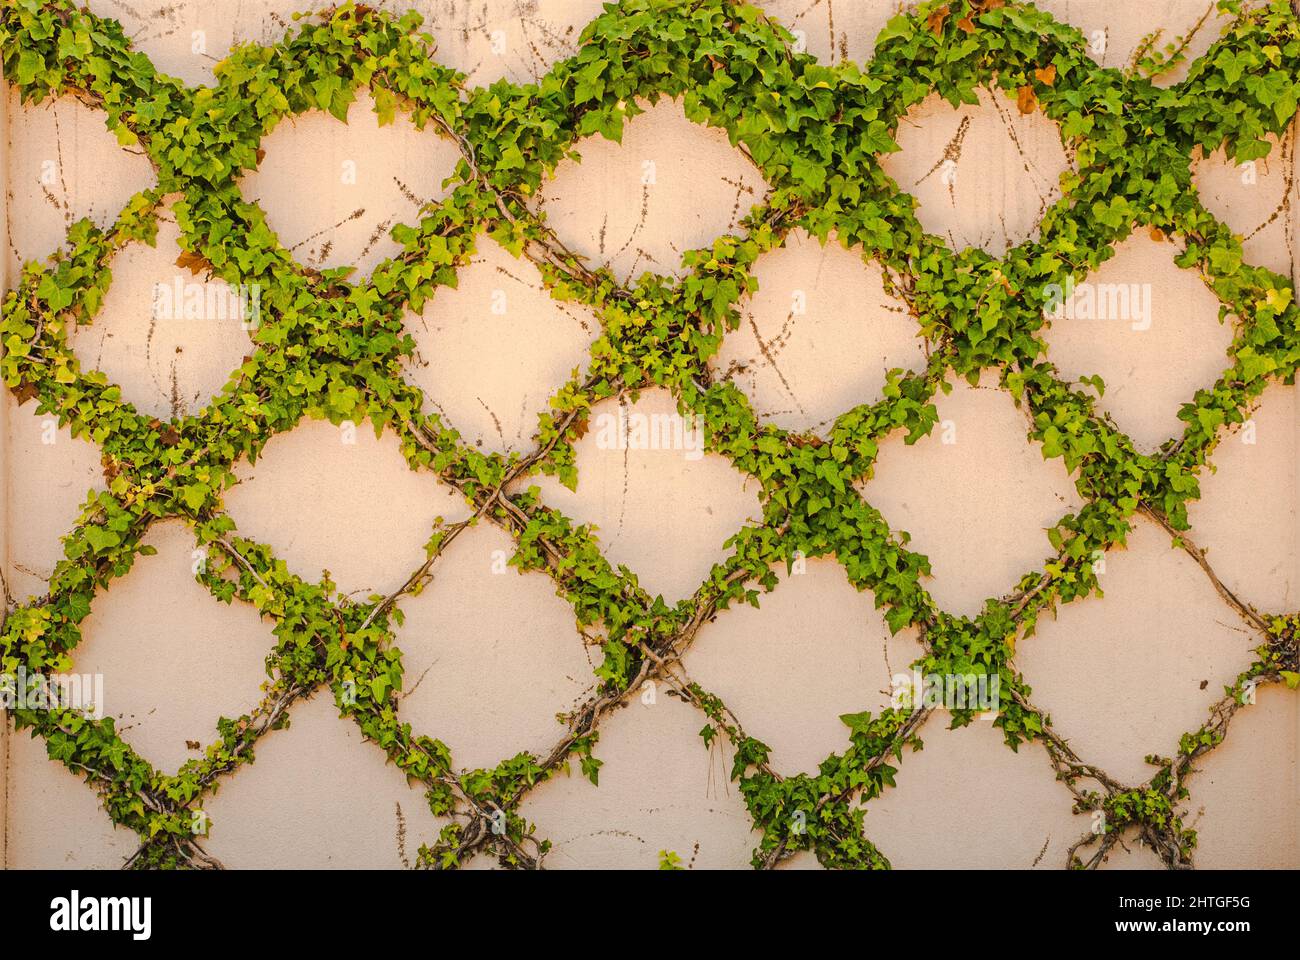 Repeat green ivy leaves in diamond pattern on stucco wall. Closeup of a trellis pattern clinging to outdoor facade. Stock Photo